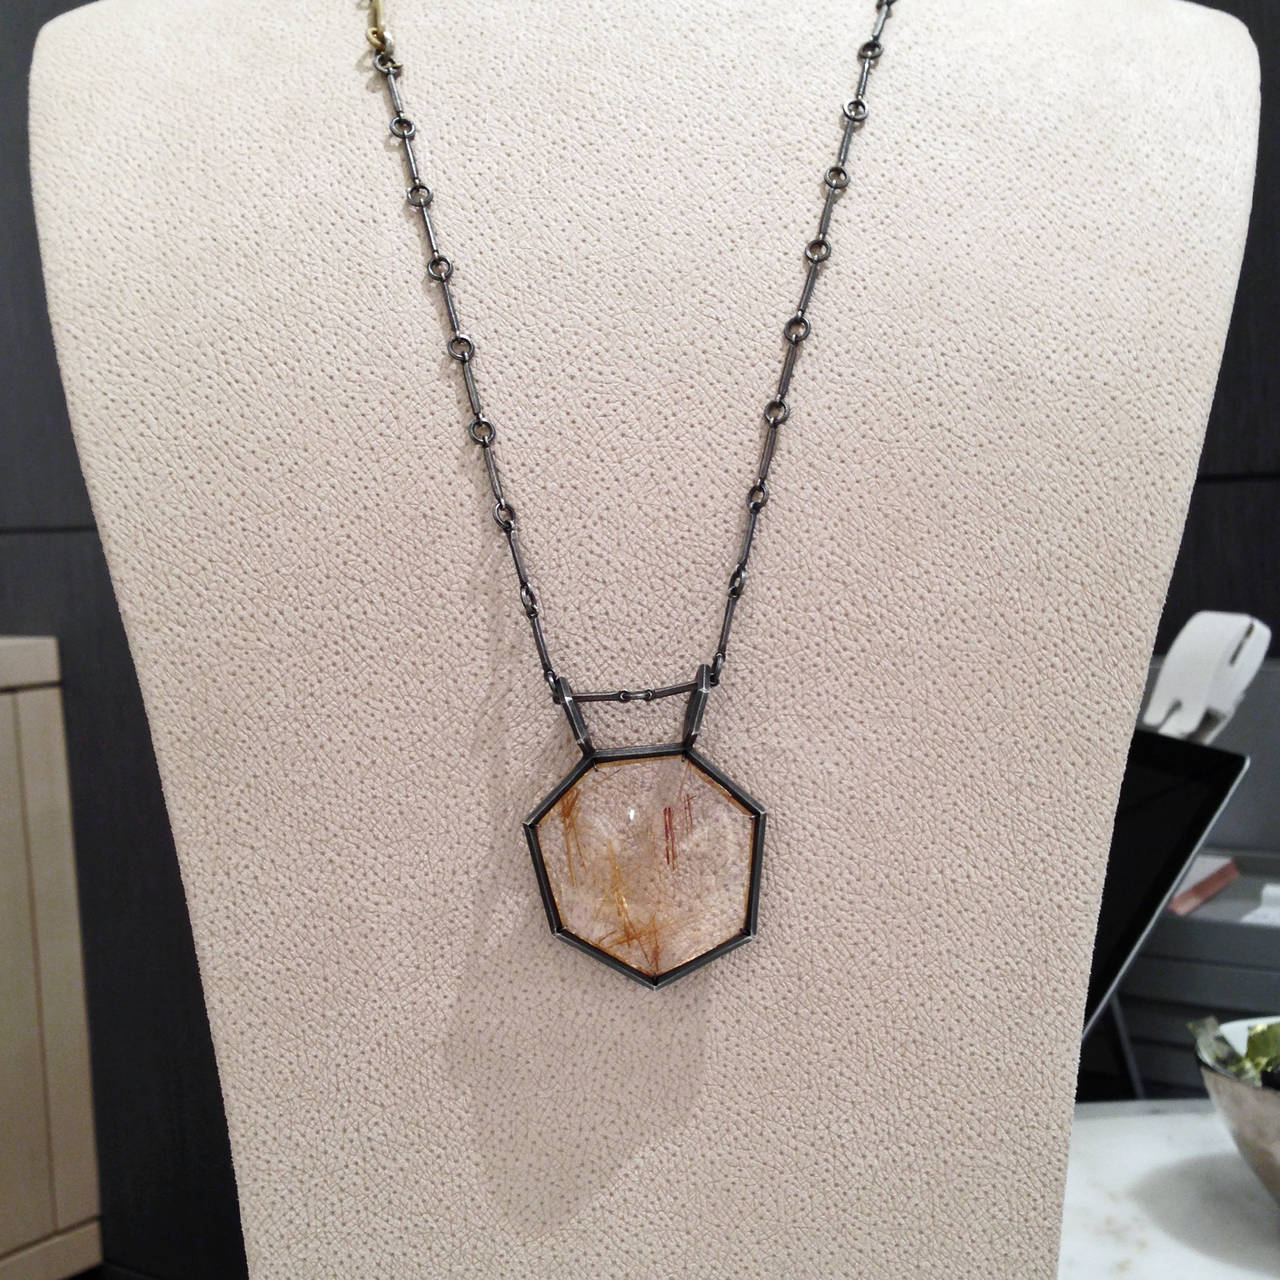 One-of-a-Kind Necklace with a beautiful rutilated quartz pendant handcrafted in graphite-finished sterling silver and matte 18k yellow gold. The rutilated quartz is faceted on one side and smooth on the other, and can therefore be worn both ways.